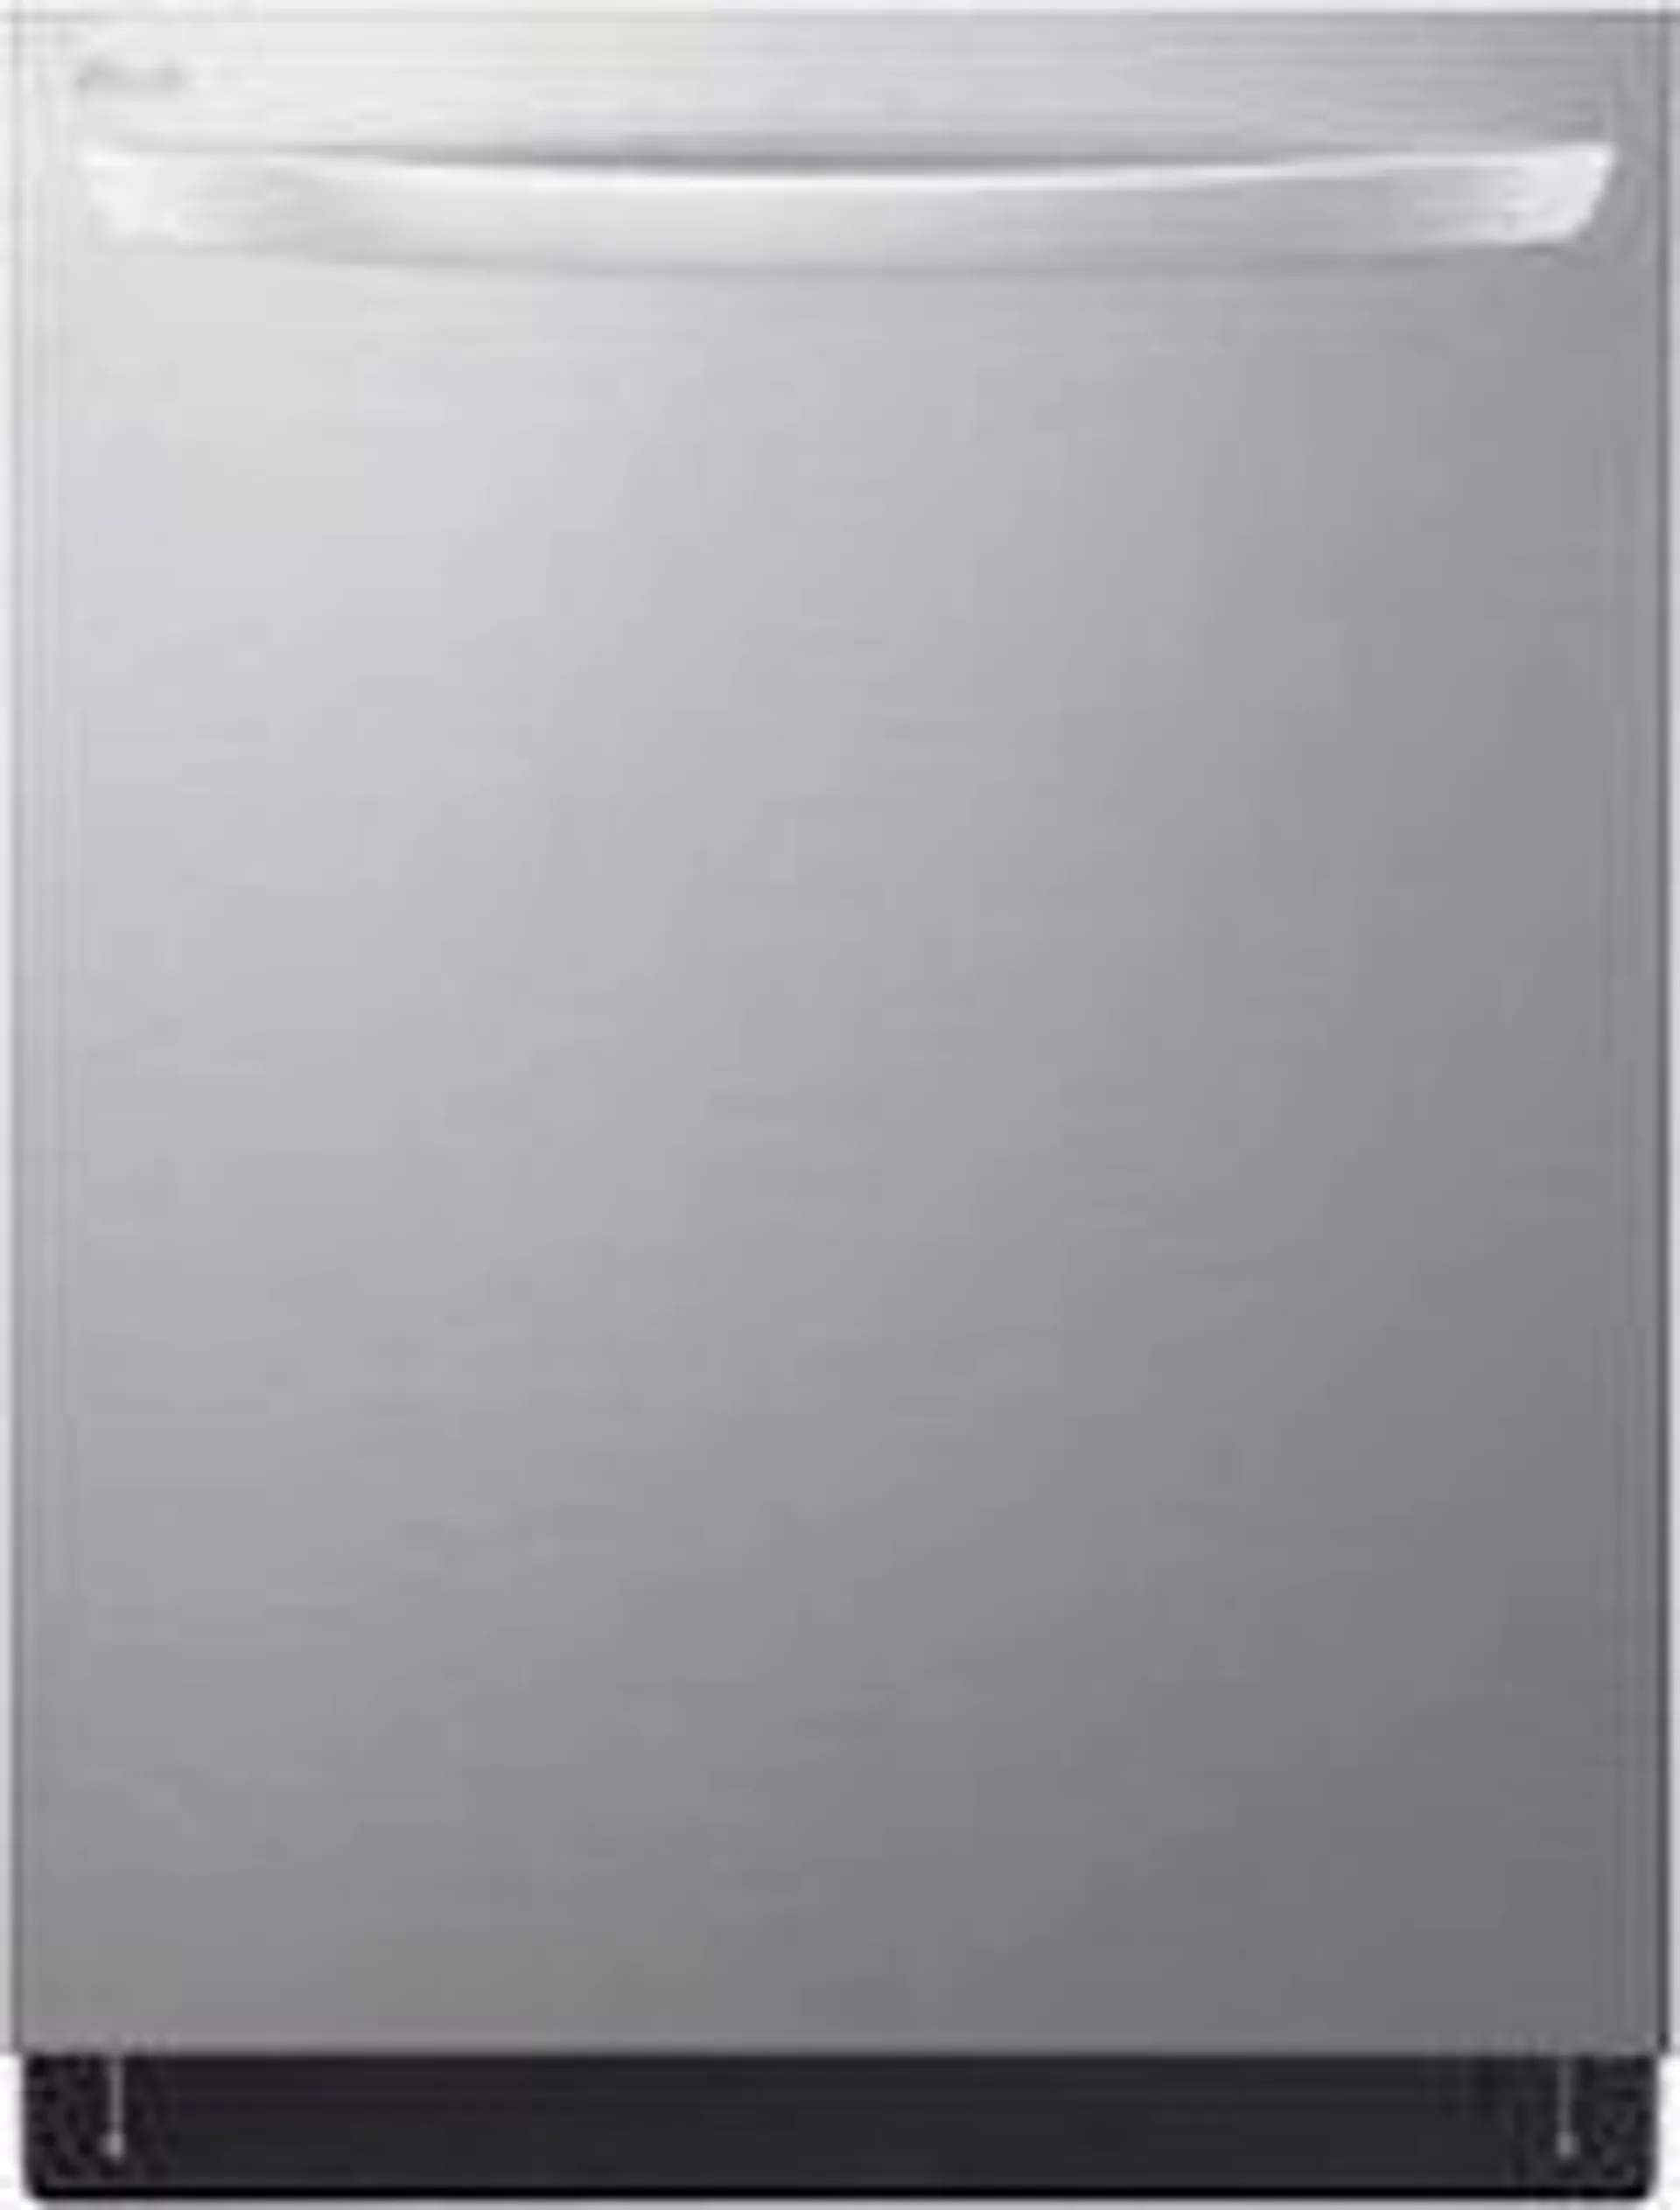 LG - 24" Front Control Smart Built-In Stainless Steel Tub Dishwasher with 3rd Rack, Quadwash, and 48dba - Stainless Steel